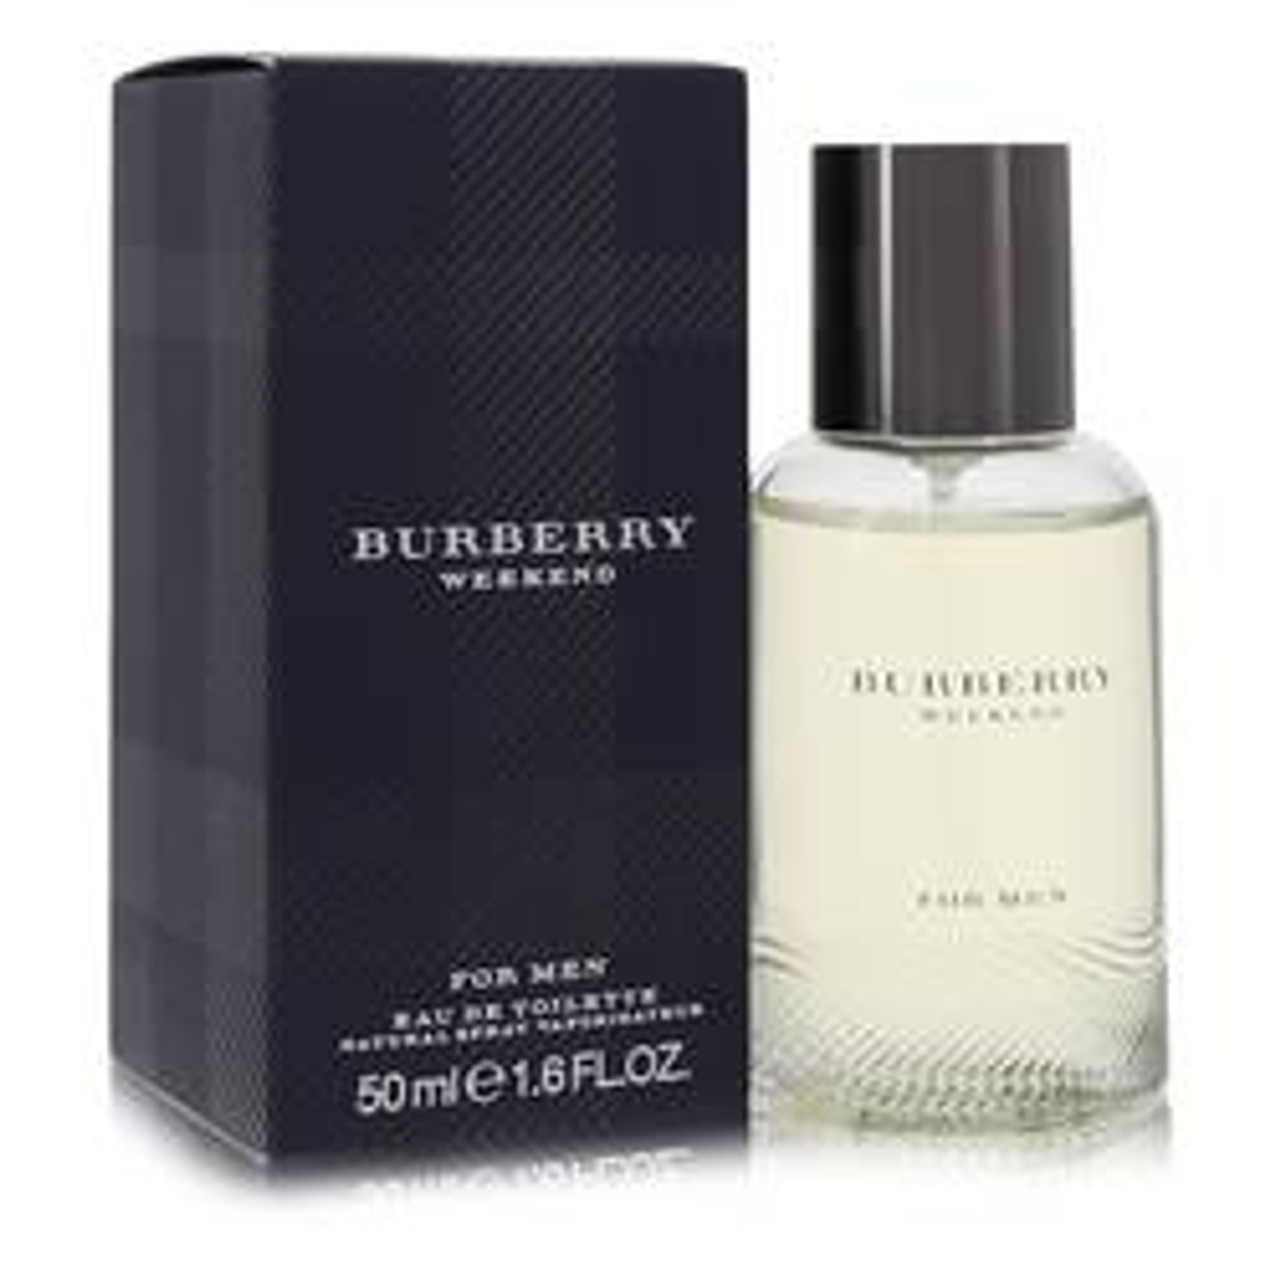 Weekend Cologne By Burberry Eau De Toilette Spray 1.7 oz for Men - [From 79.50 - Choose pk Qty ] - *Ships from Miami